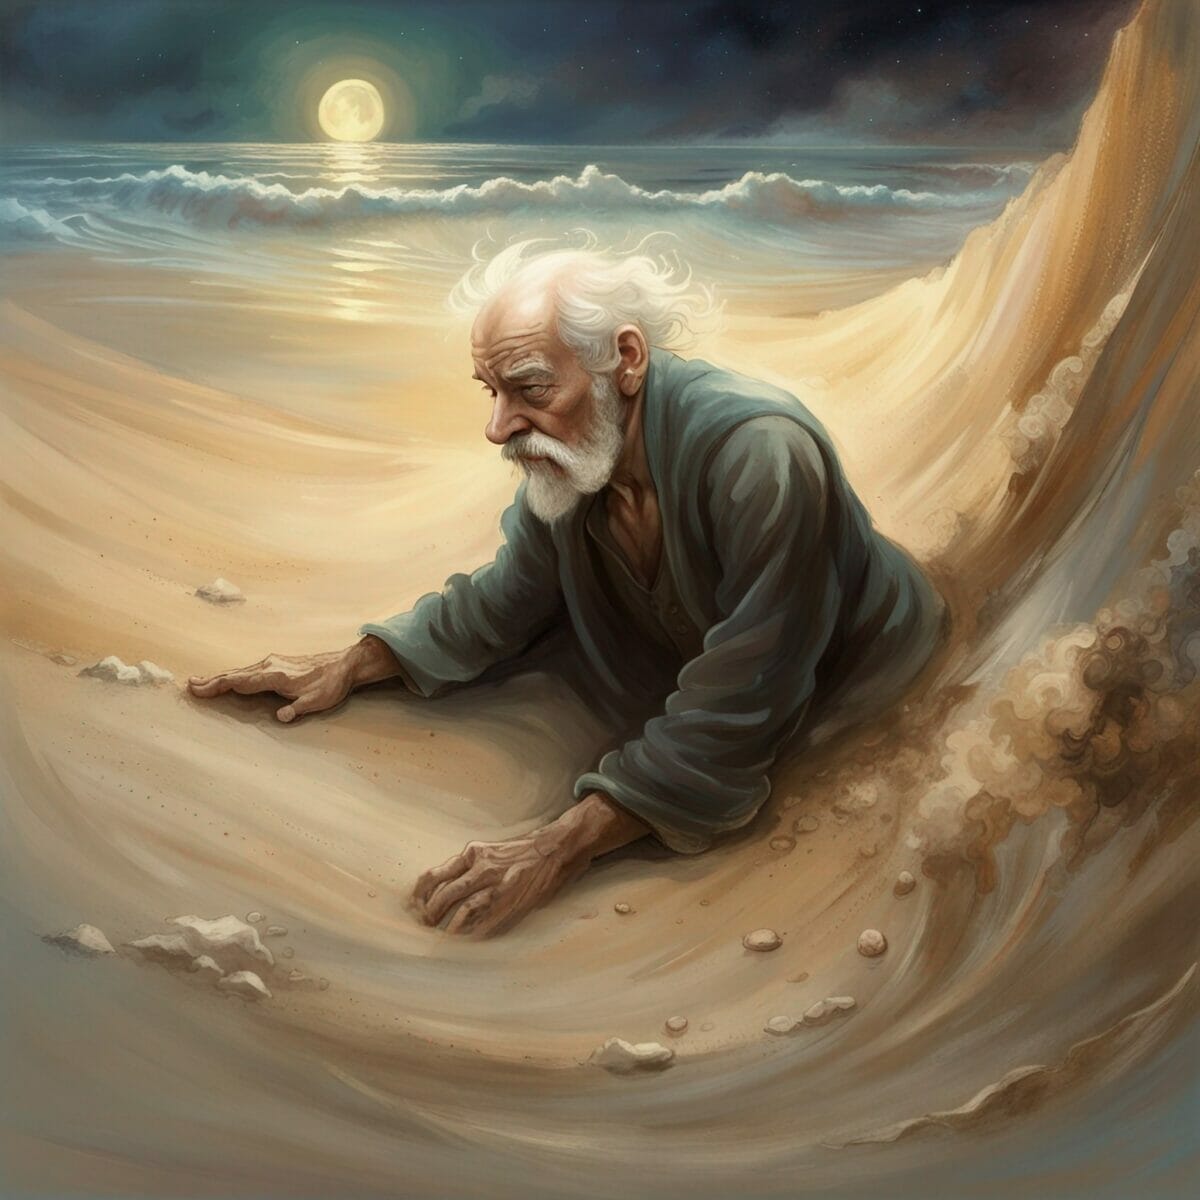 An old man sinking in the sand by the seashore.